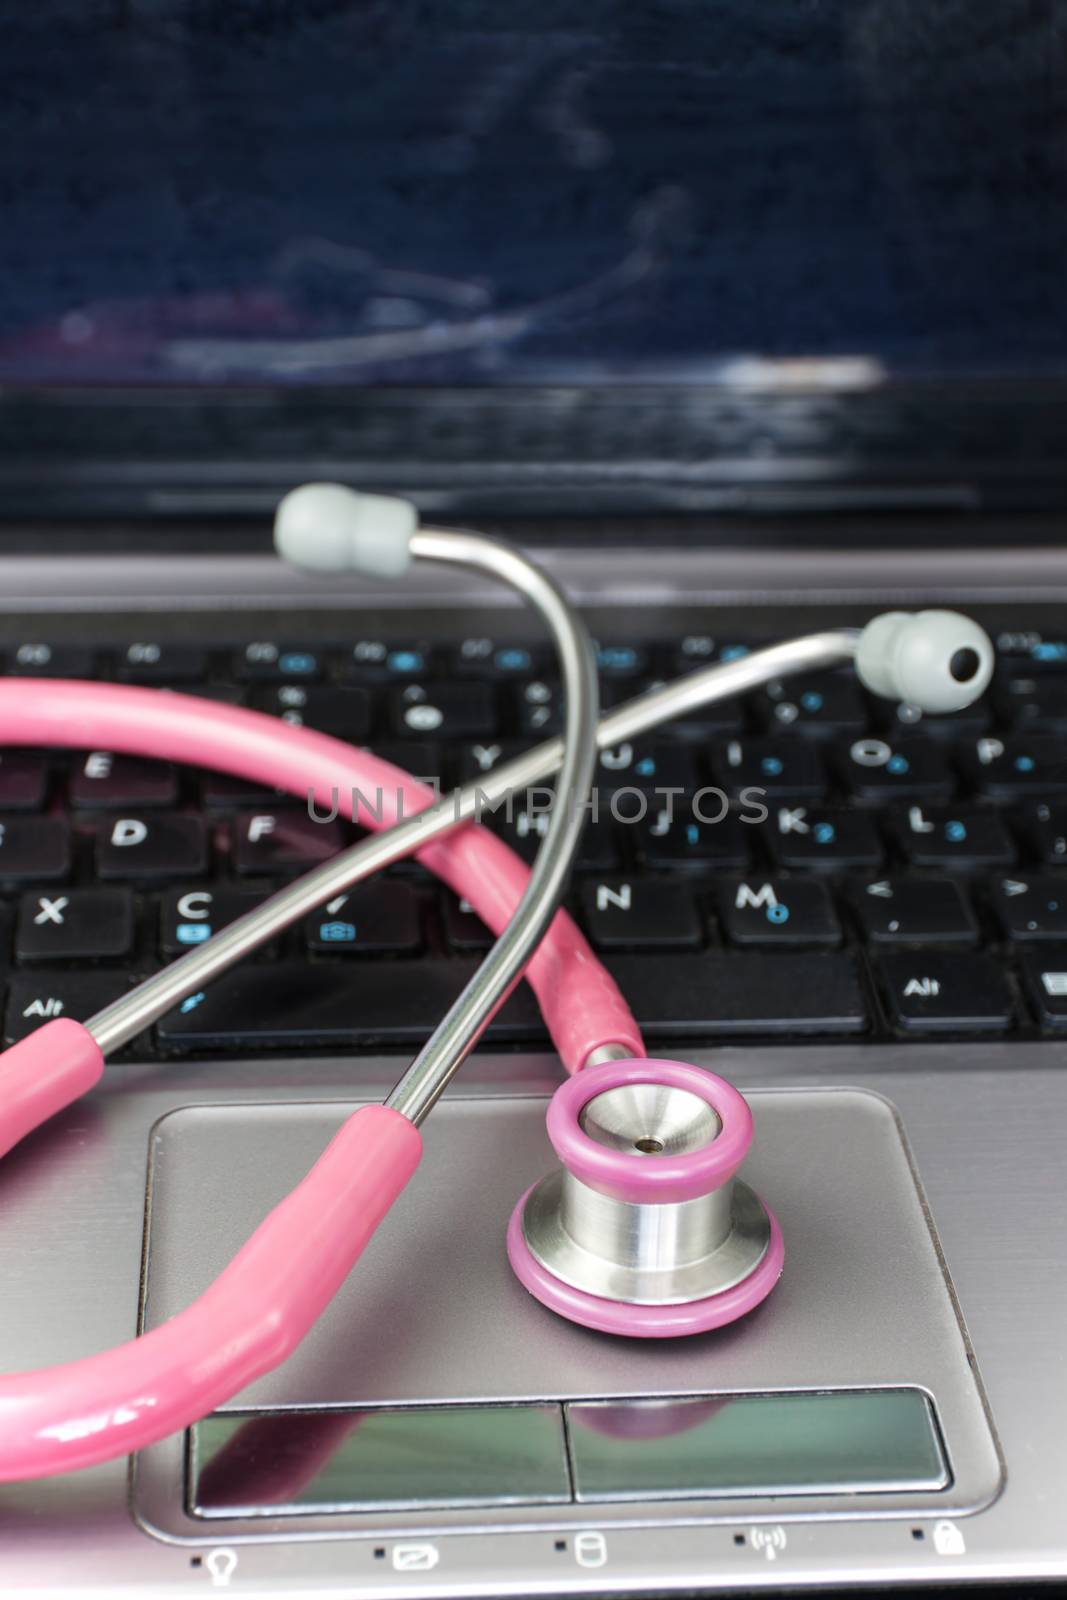 Stethoscope and Laptop1 by PeachLoveU